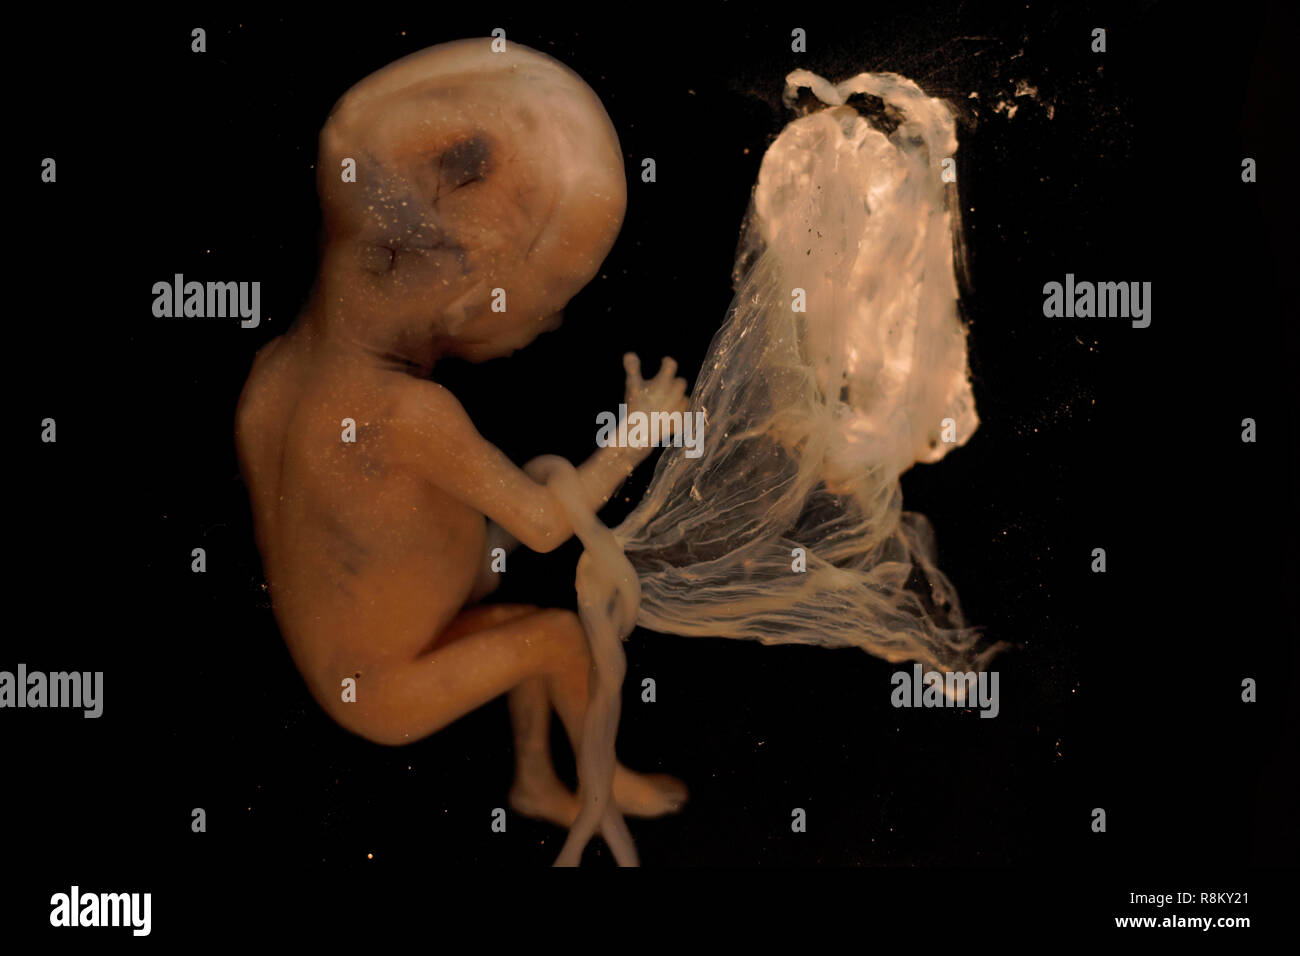 Human fetus at third month of pregnancy. Preserved in Formaldehyde. Stock Photo